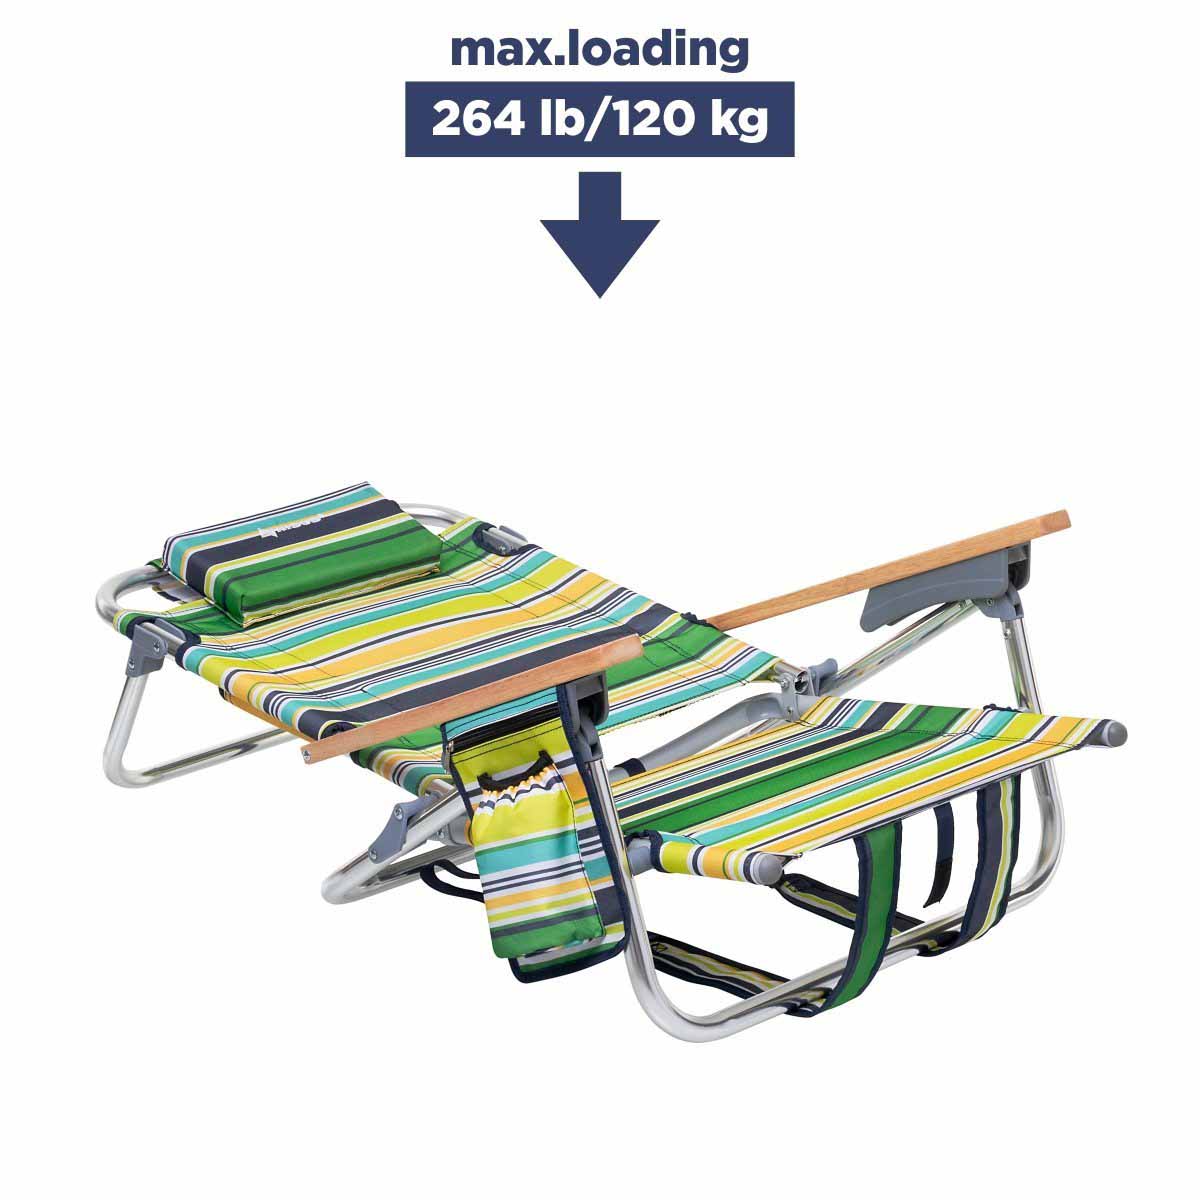 Backpack Beach Chair with Headrest max loading is 264 lbs